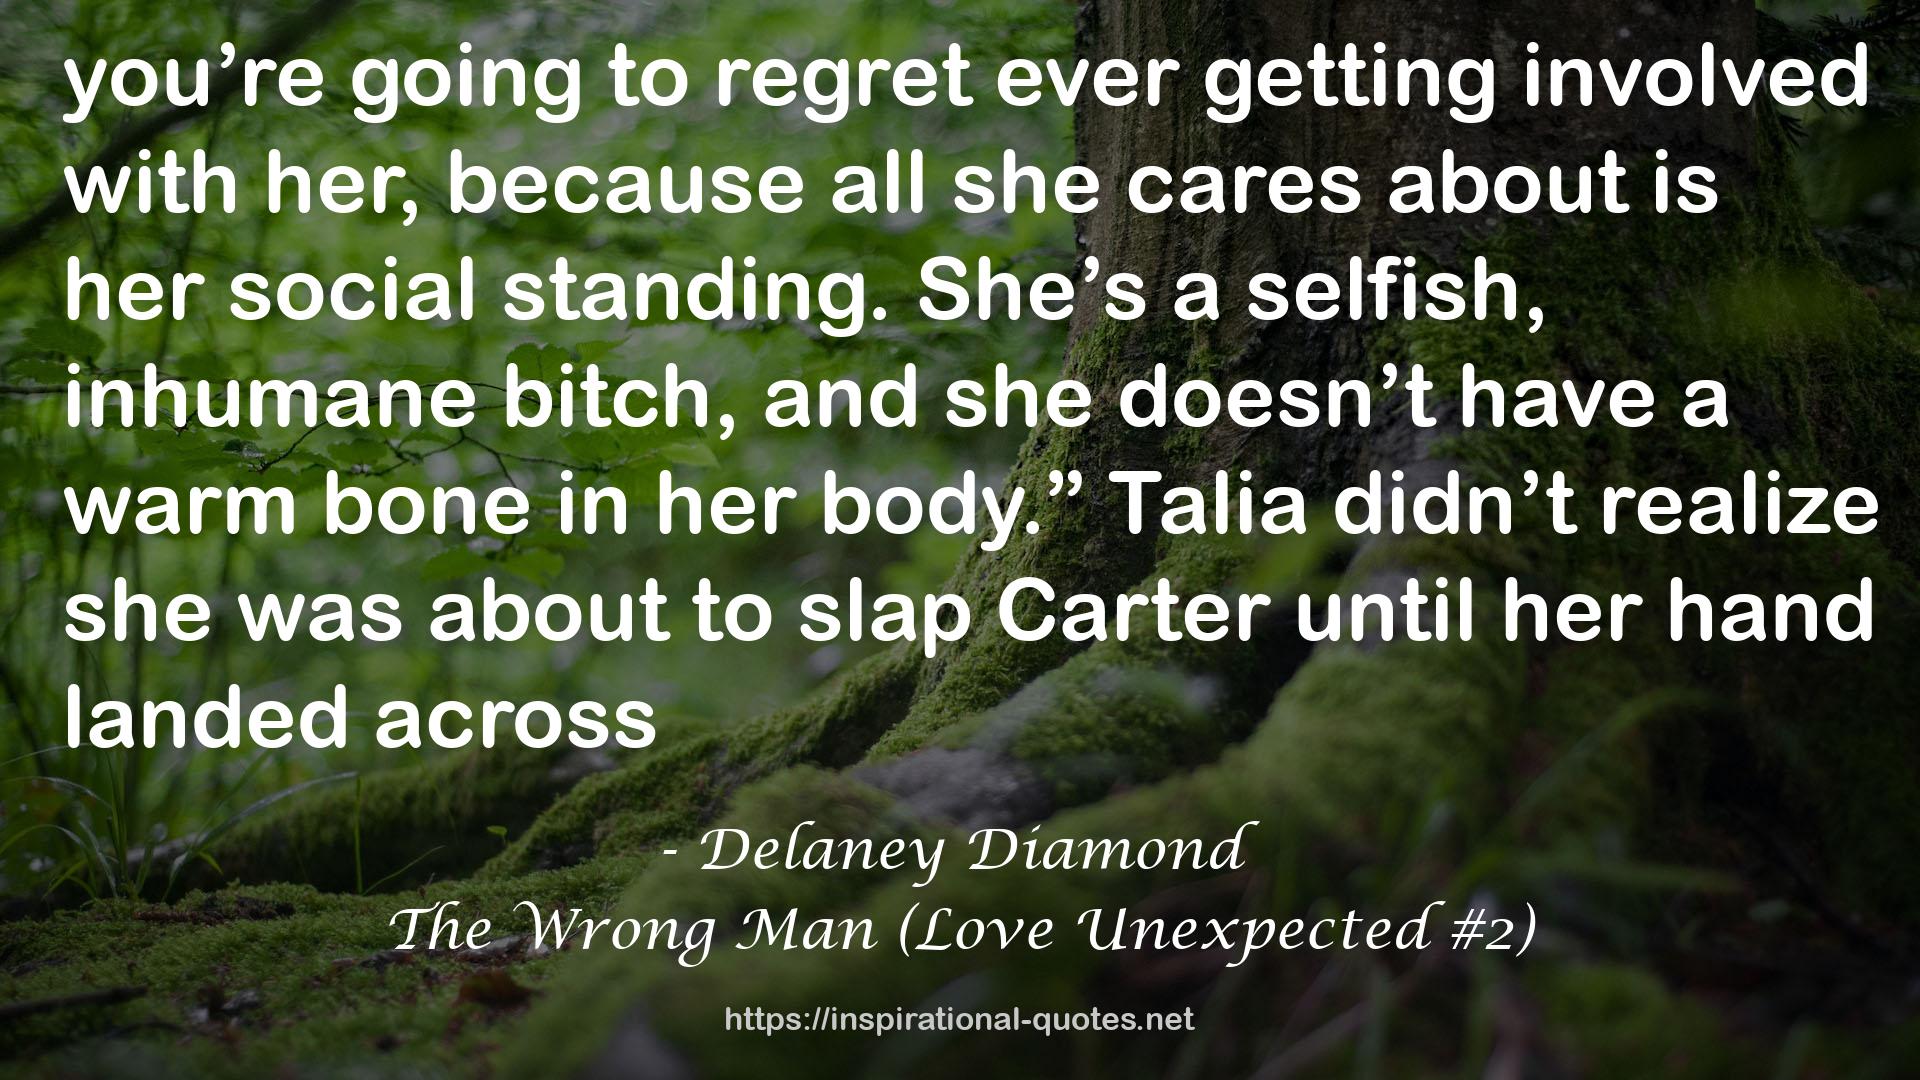 The Wrong Man (Love Unexpected #2) QUOTES